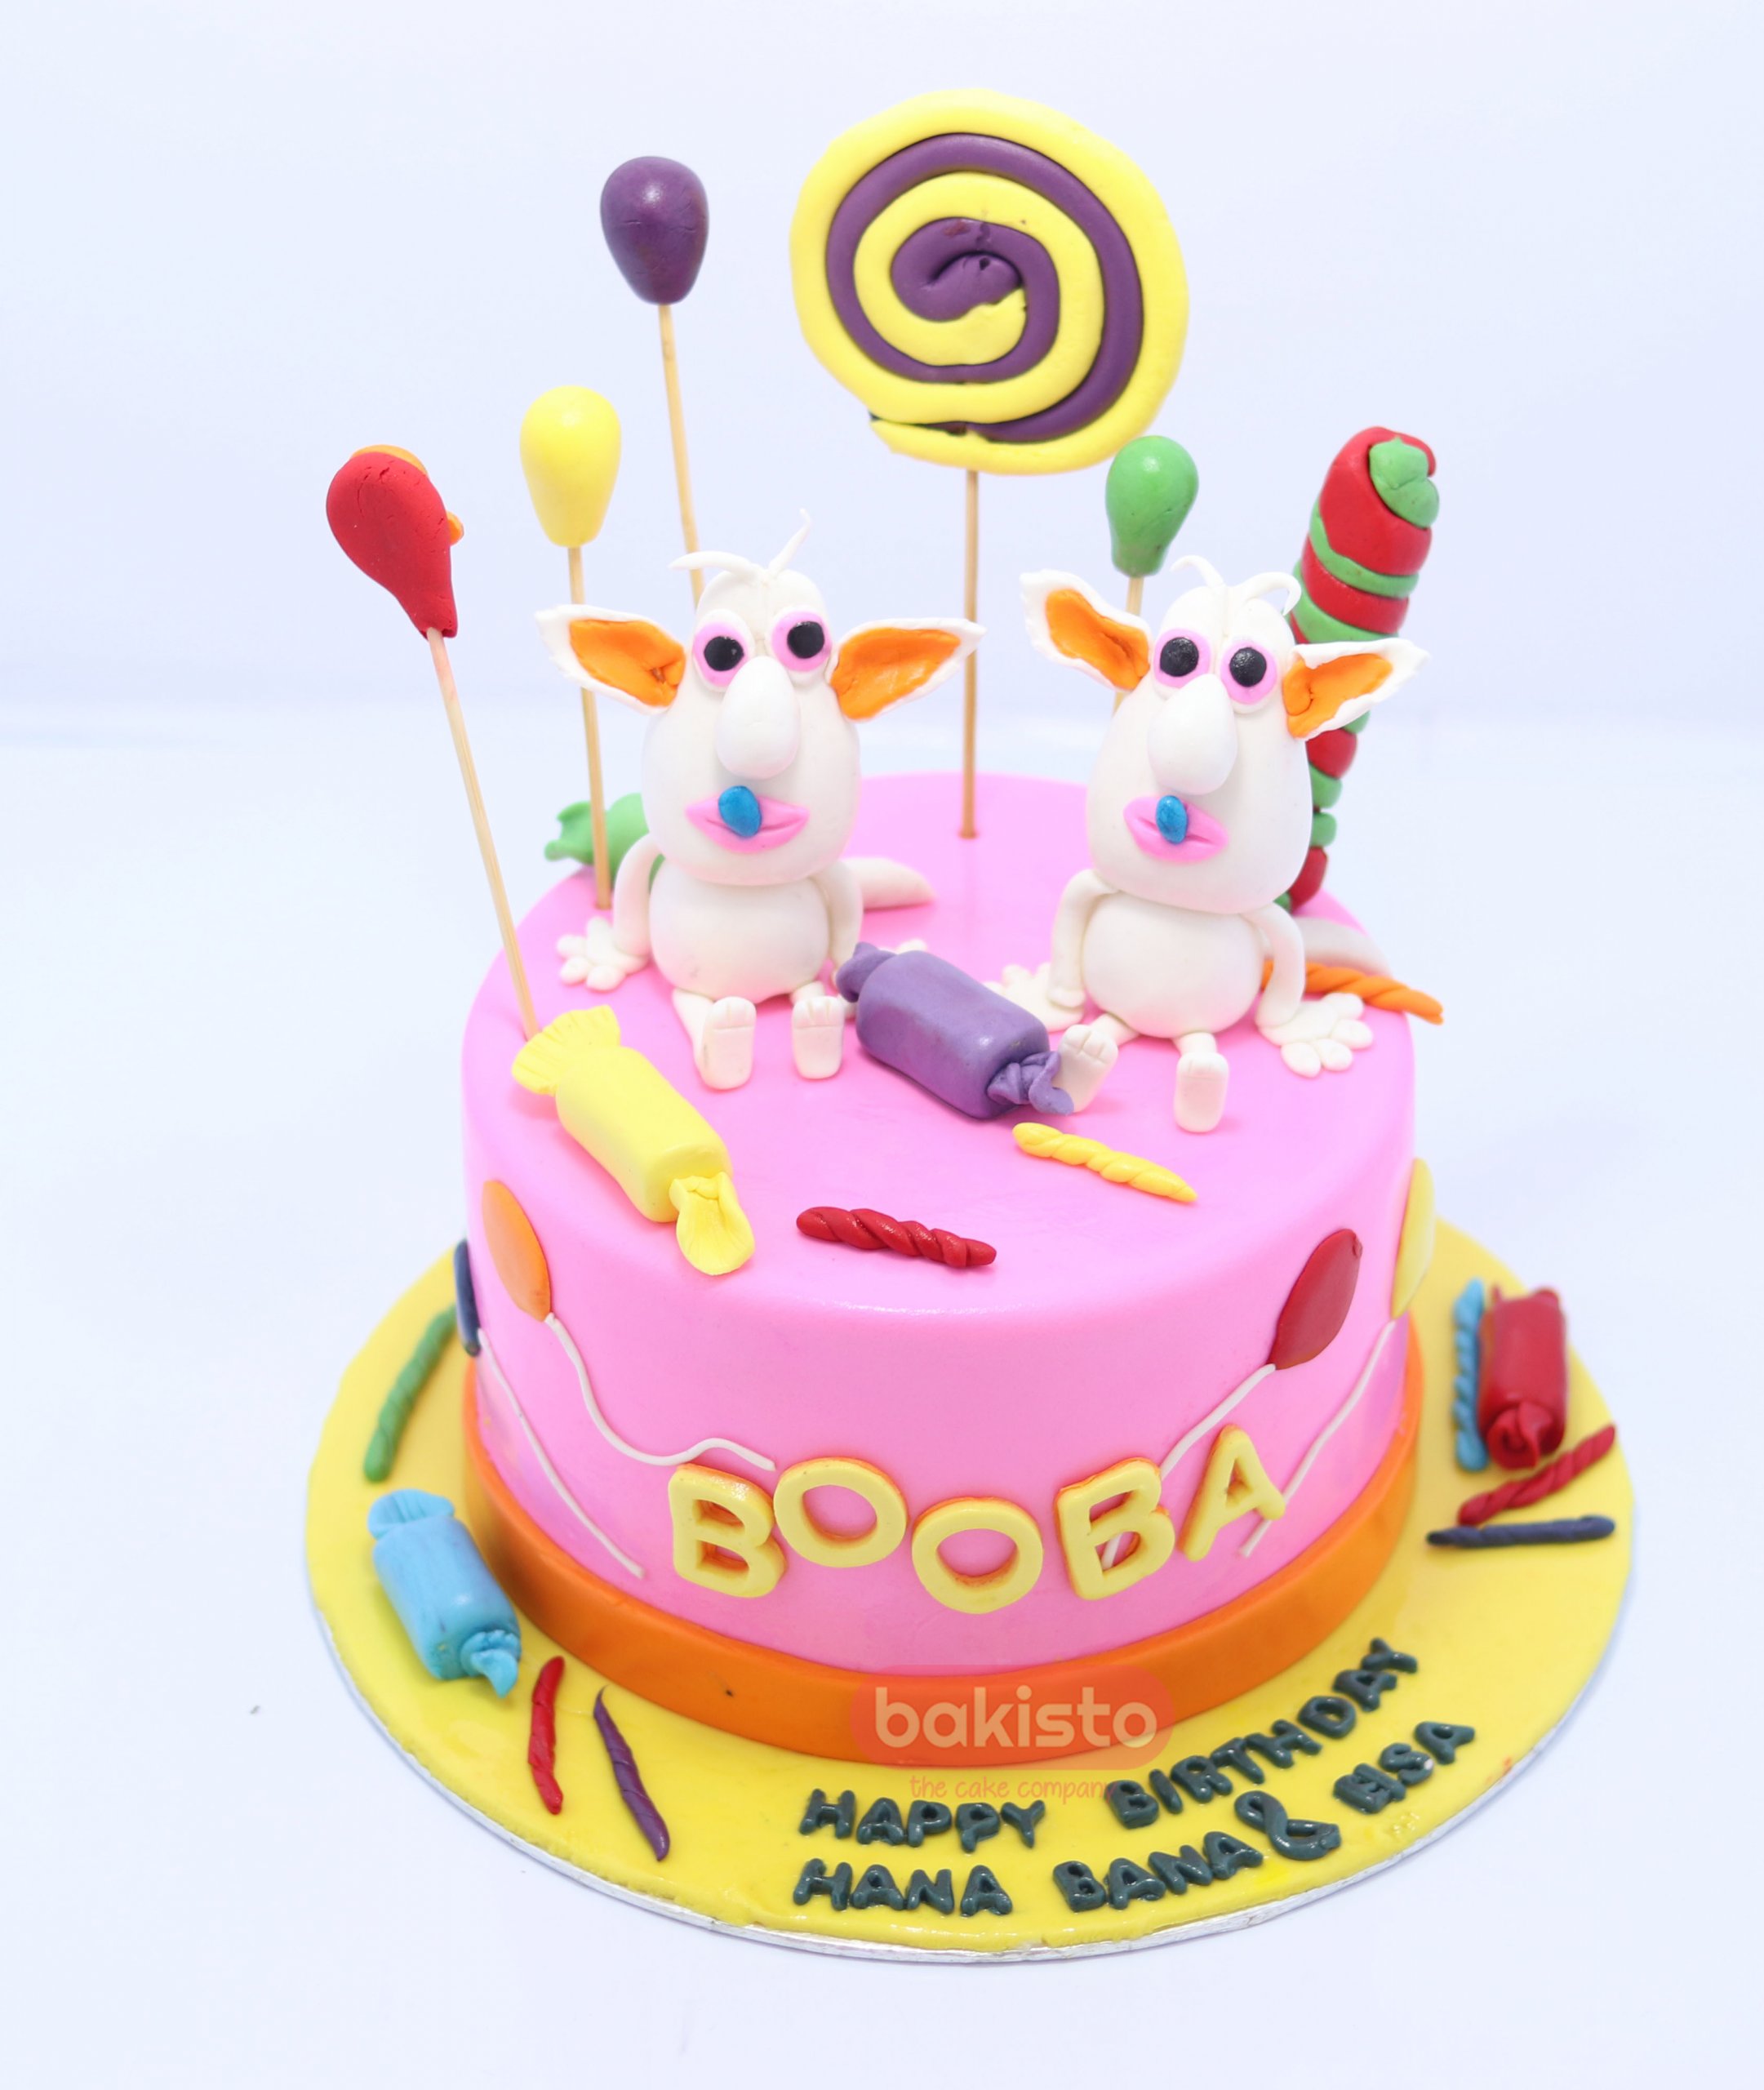 Get Your Booba Fix with Our Delicious Booba Cake | Order Now